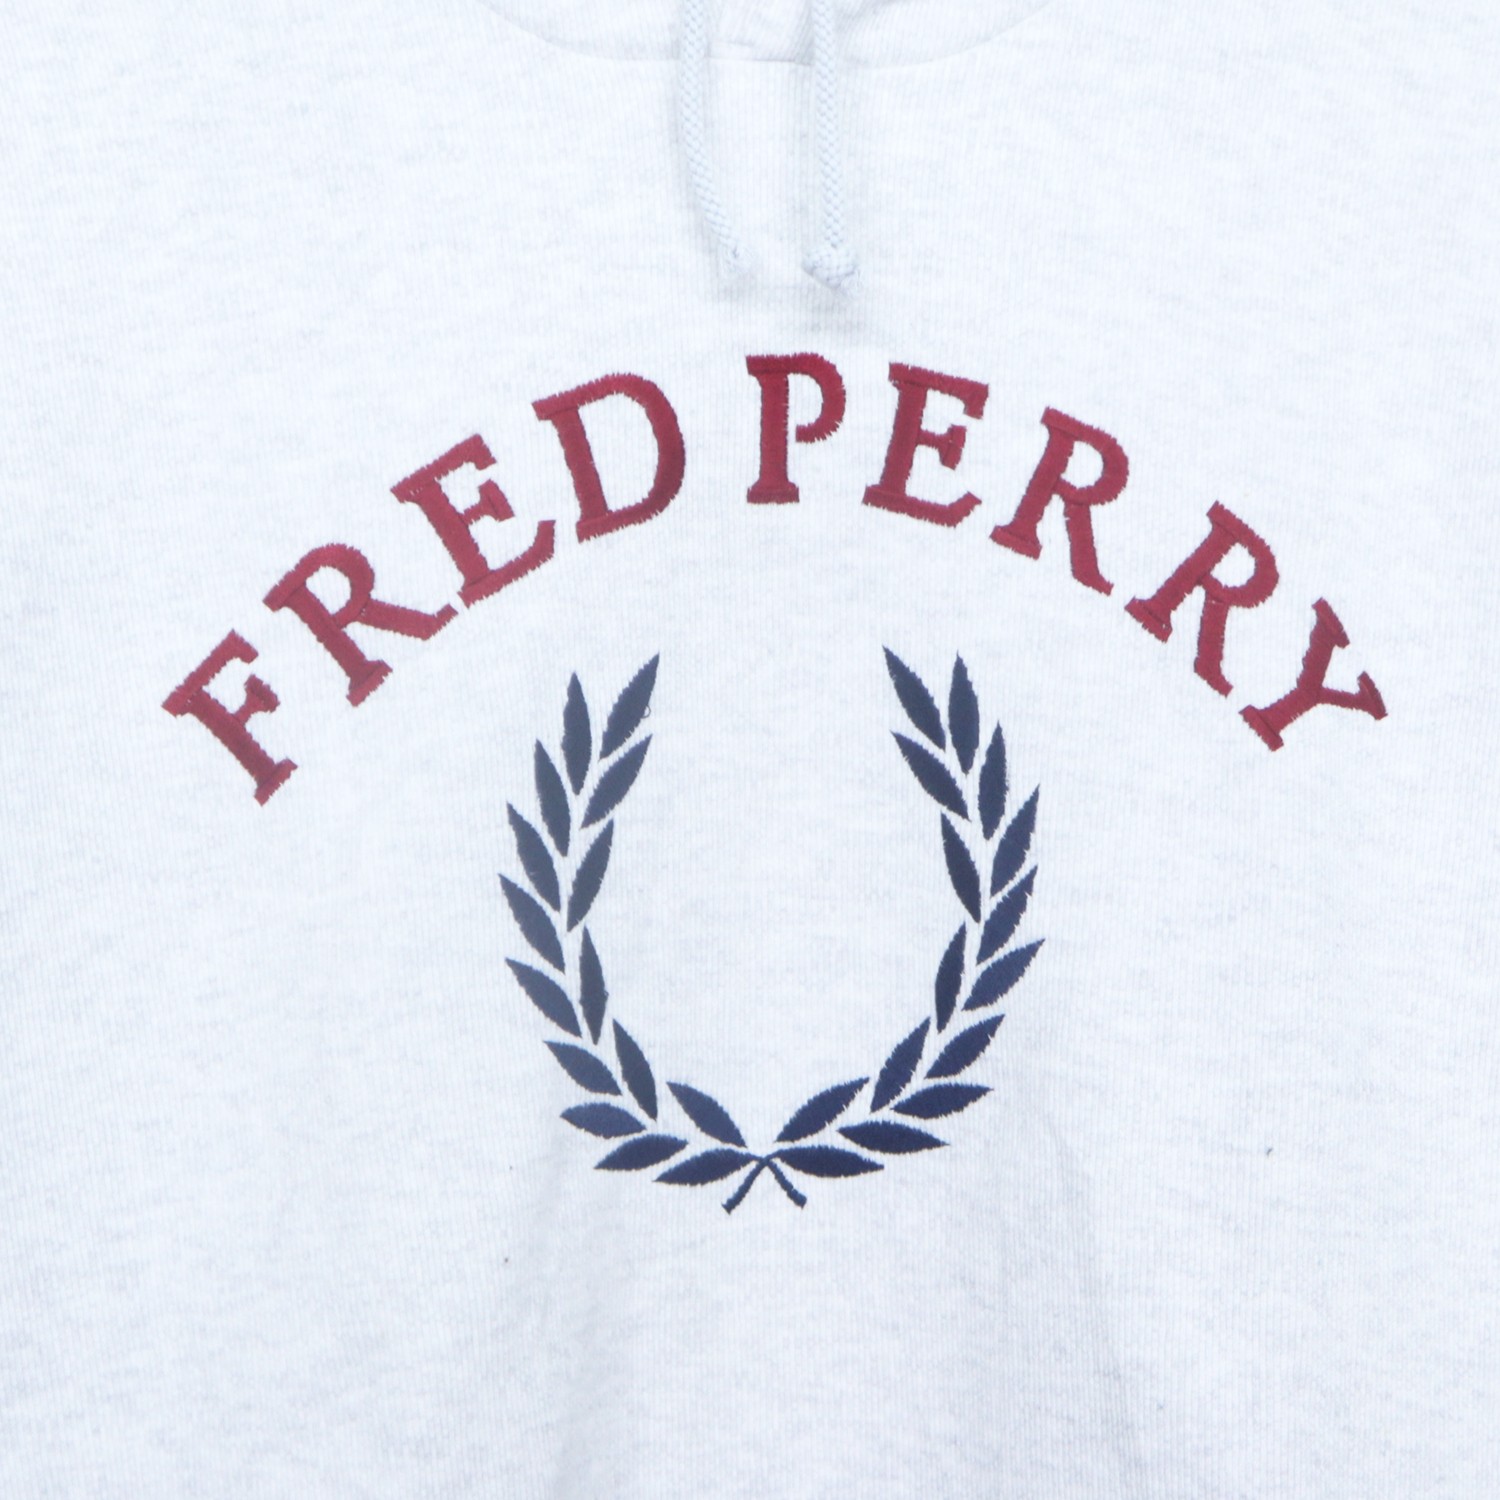 Vintage 90s FRED PERRY Big Logo Embroidered Sweater Sweatshirt Hoodie Pullover Jumper Made In Japan - 2